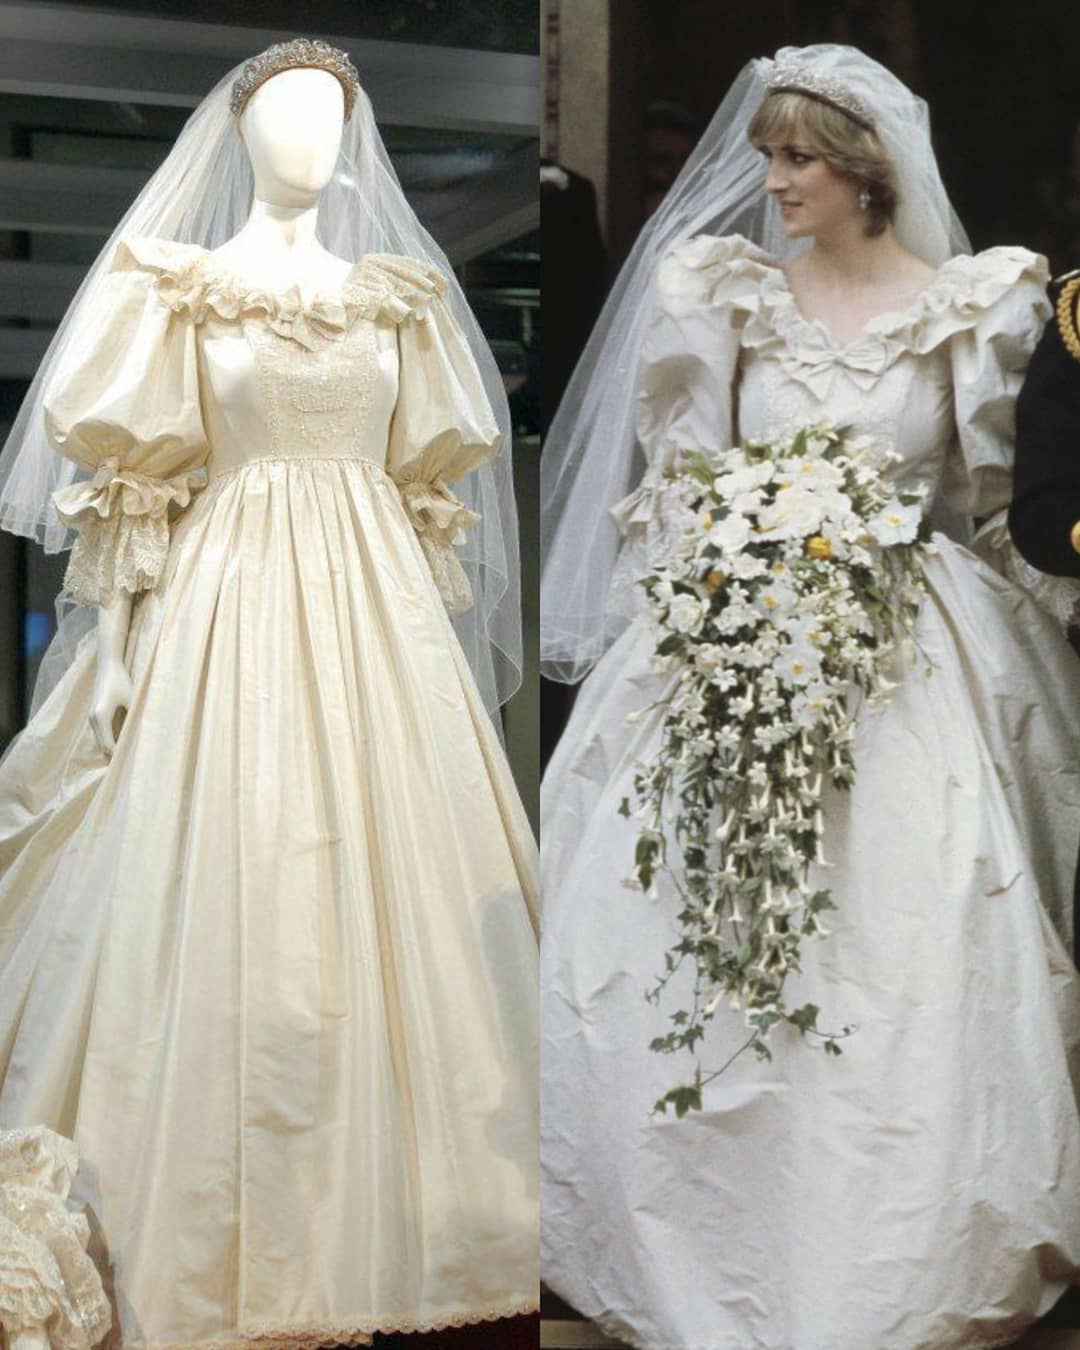 Everything To Know About Princess Diana's Wedding Dress